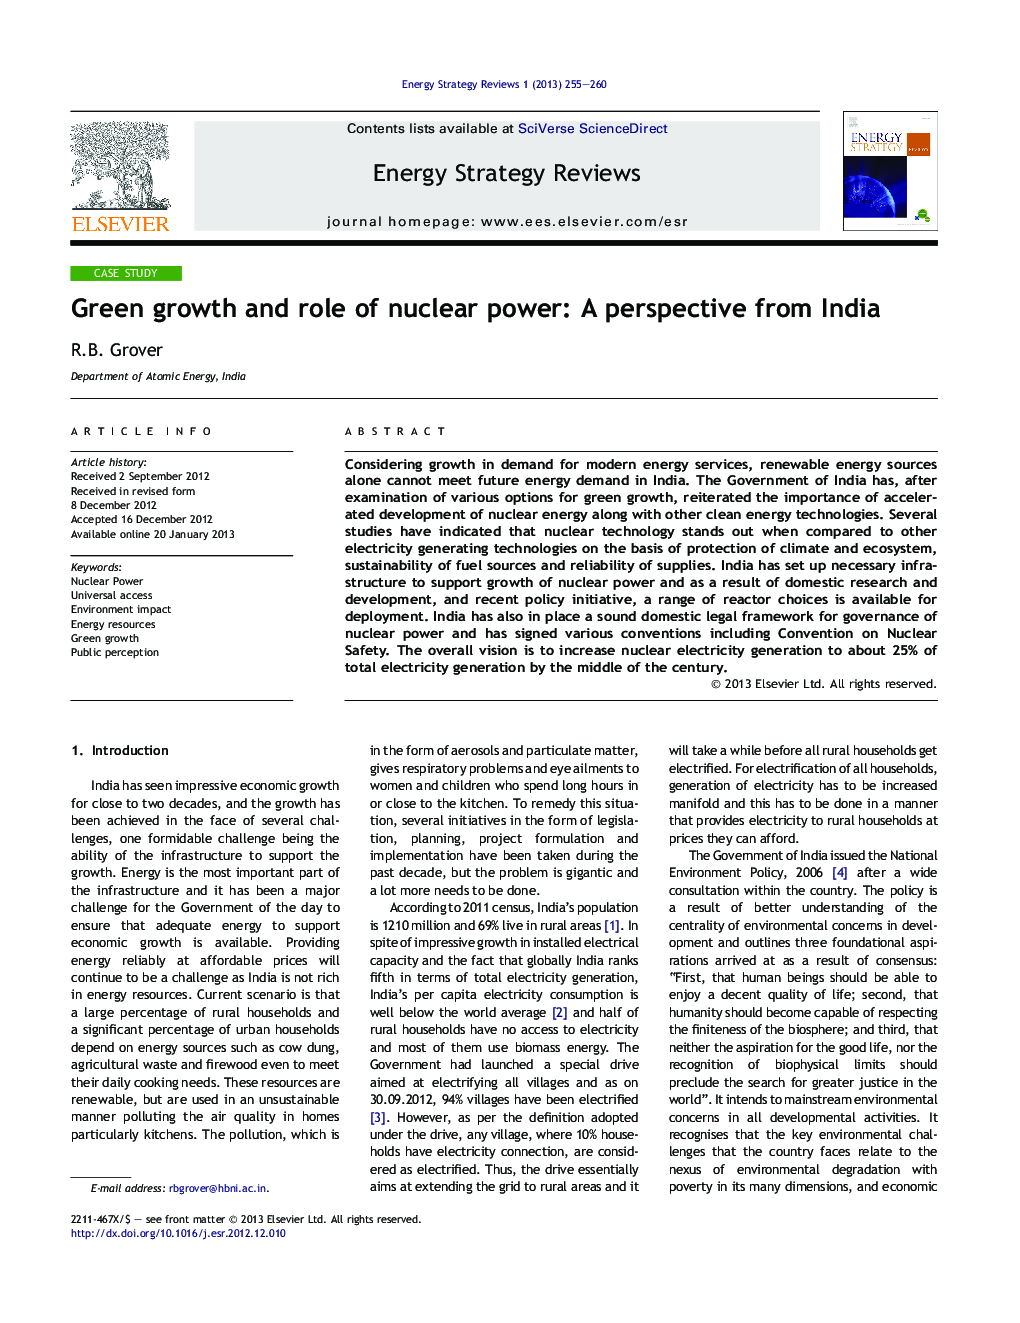 Green growth and role of nuclear power: A perspective from India